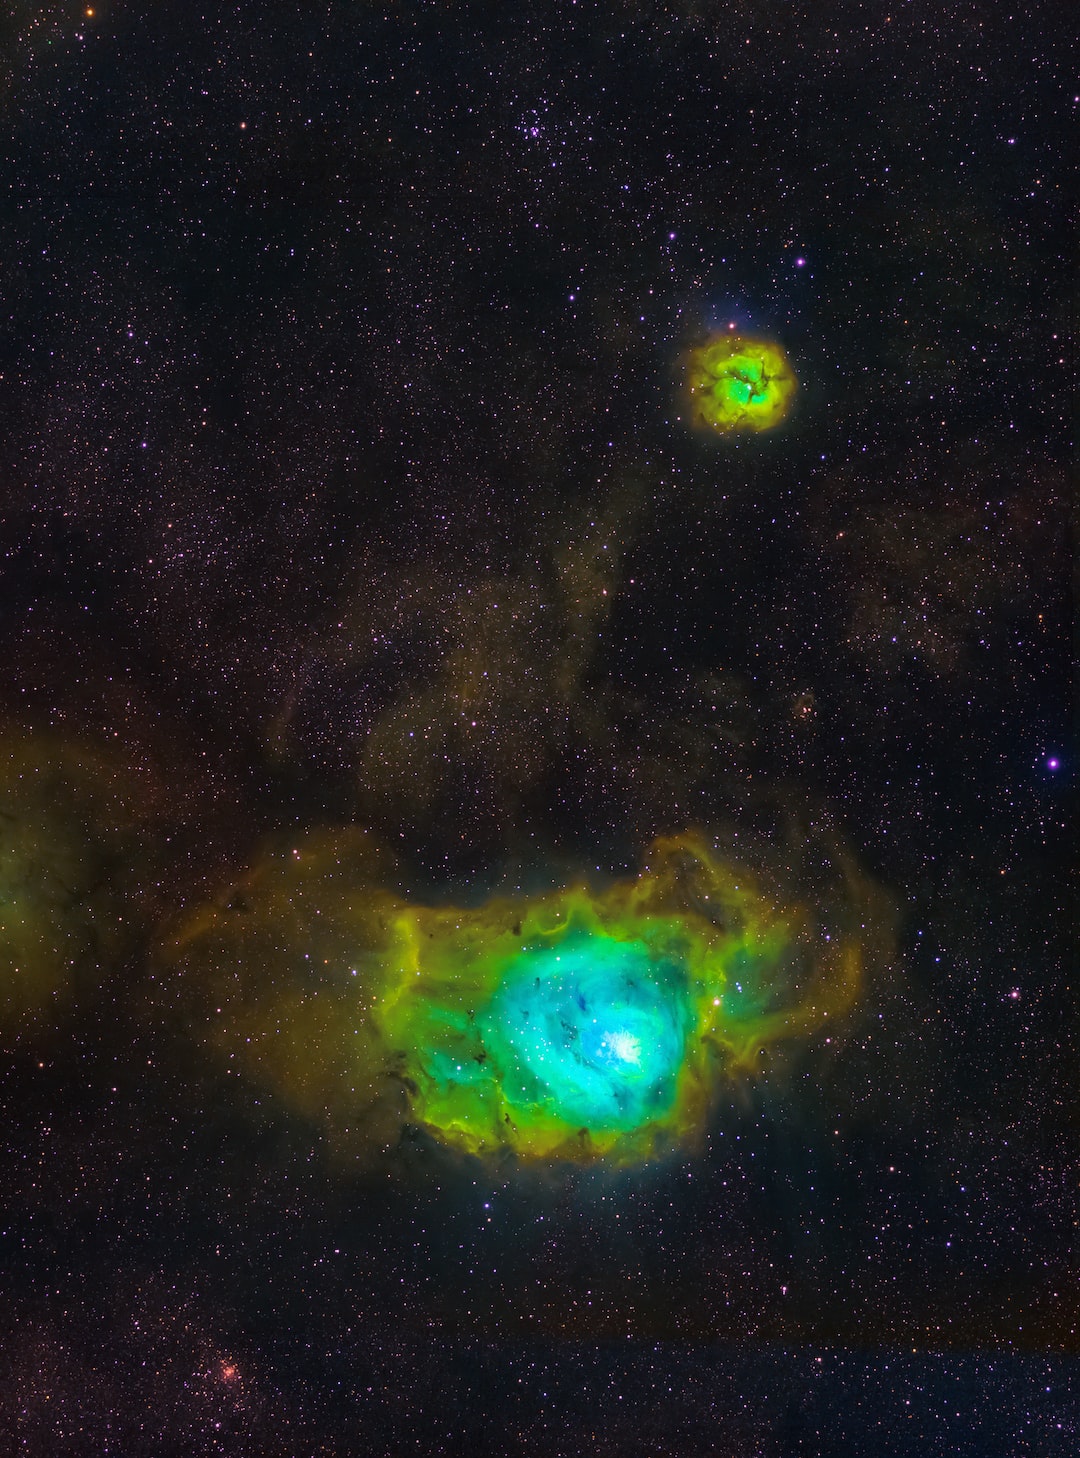 Dive into the “Lagoon” and “Trifid” nebulae